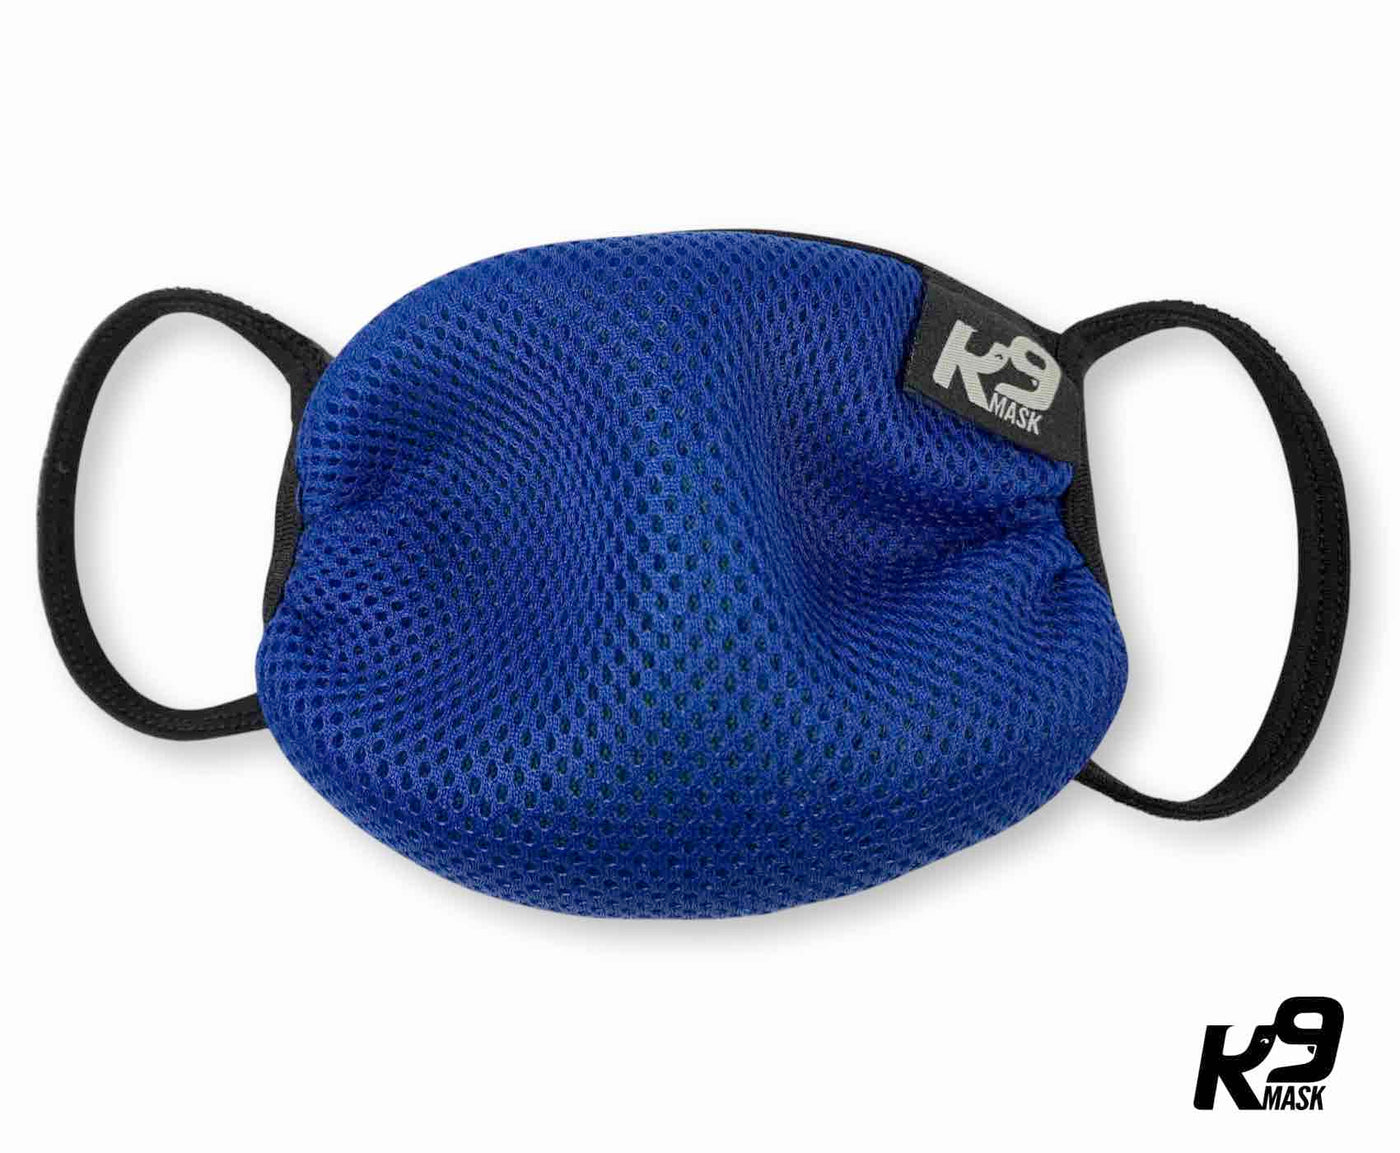 K9 Mask® for Humans clean breathe air face mask blue